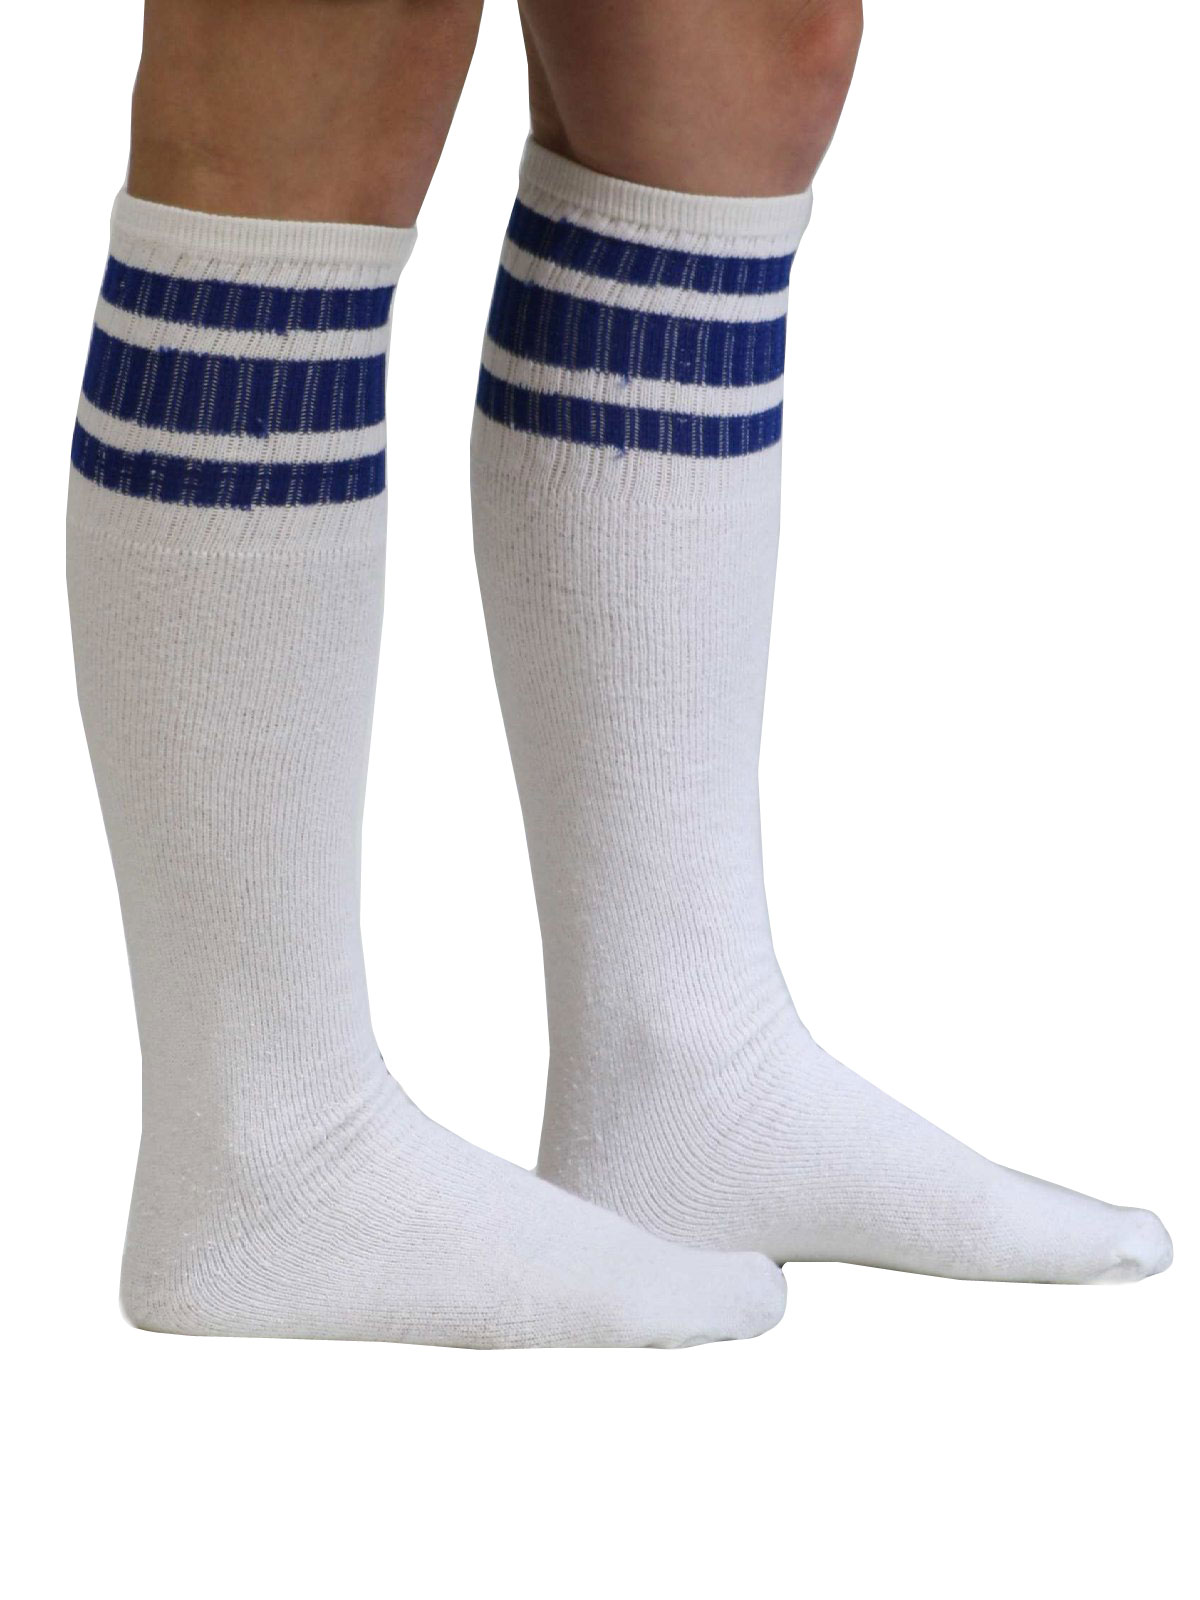 1980's Socks (Missing Label): 80s -Missing Label- Dudes, when is the last  time you were actually able to find fantastic knee high cotton blend tube  socks with blue stripe rib knit trim